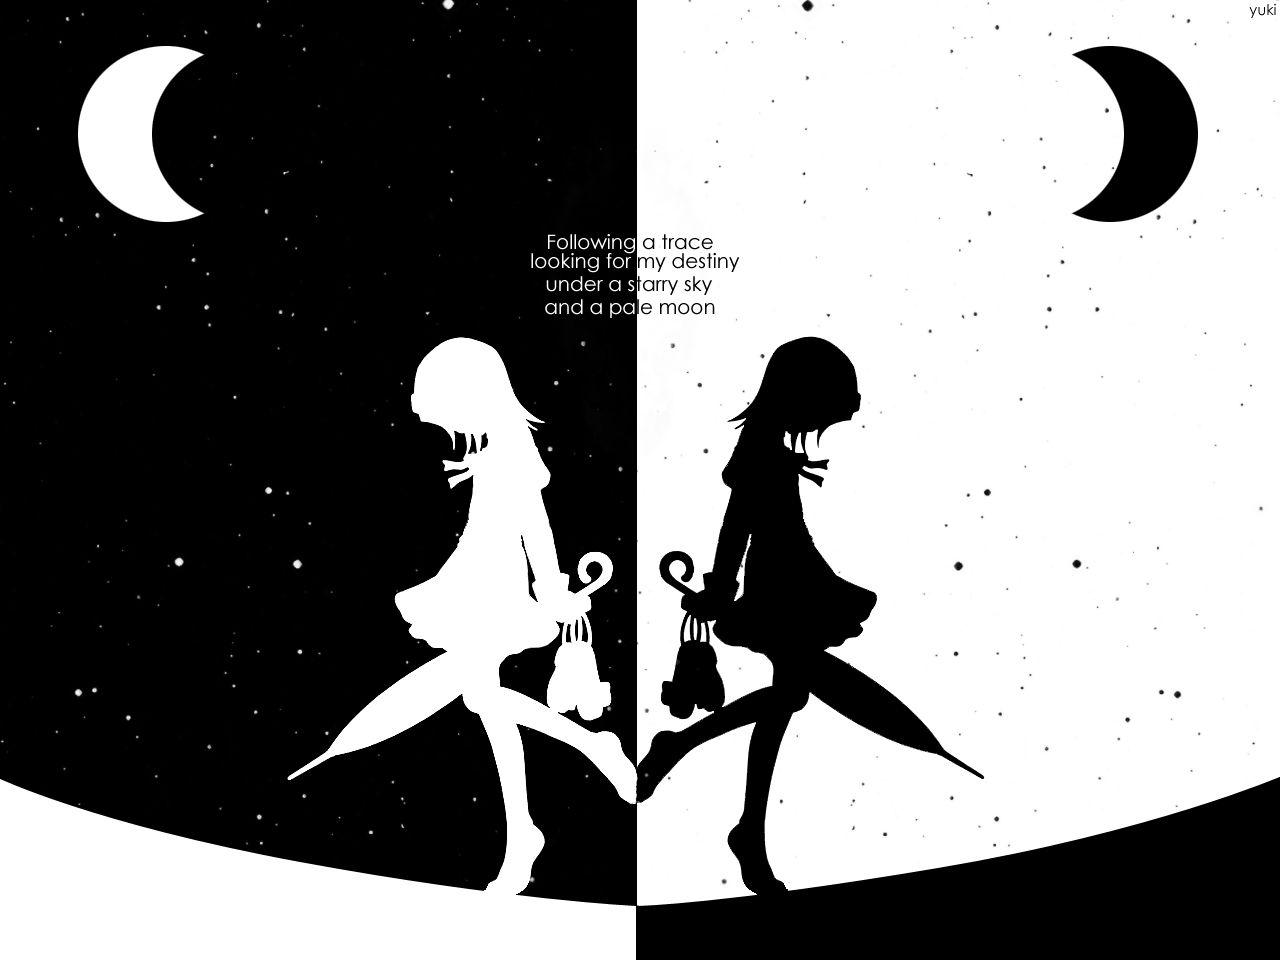 Black And White Anime Wallpapers Top Free Black And White Anime